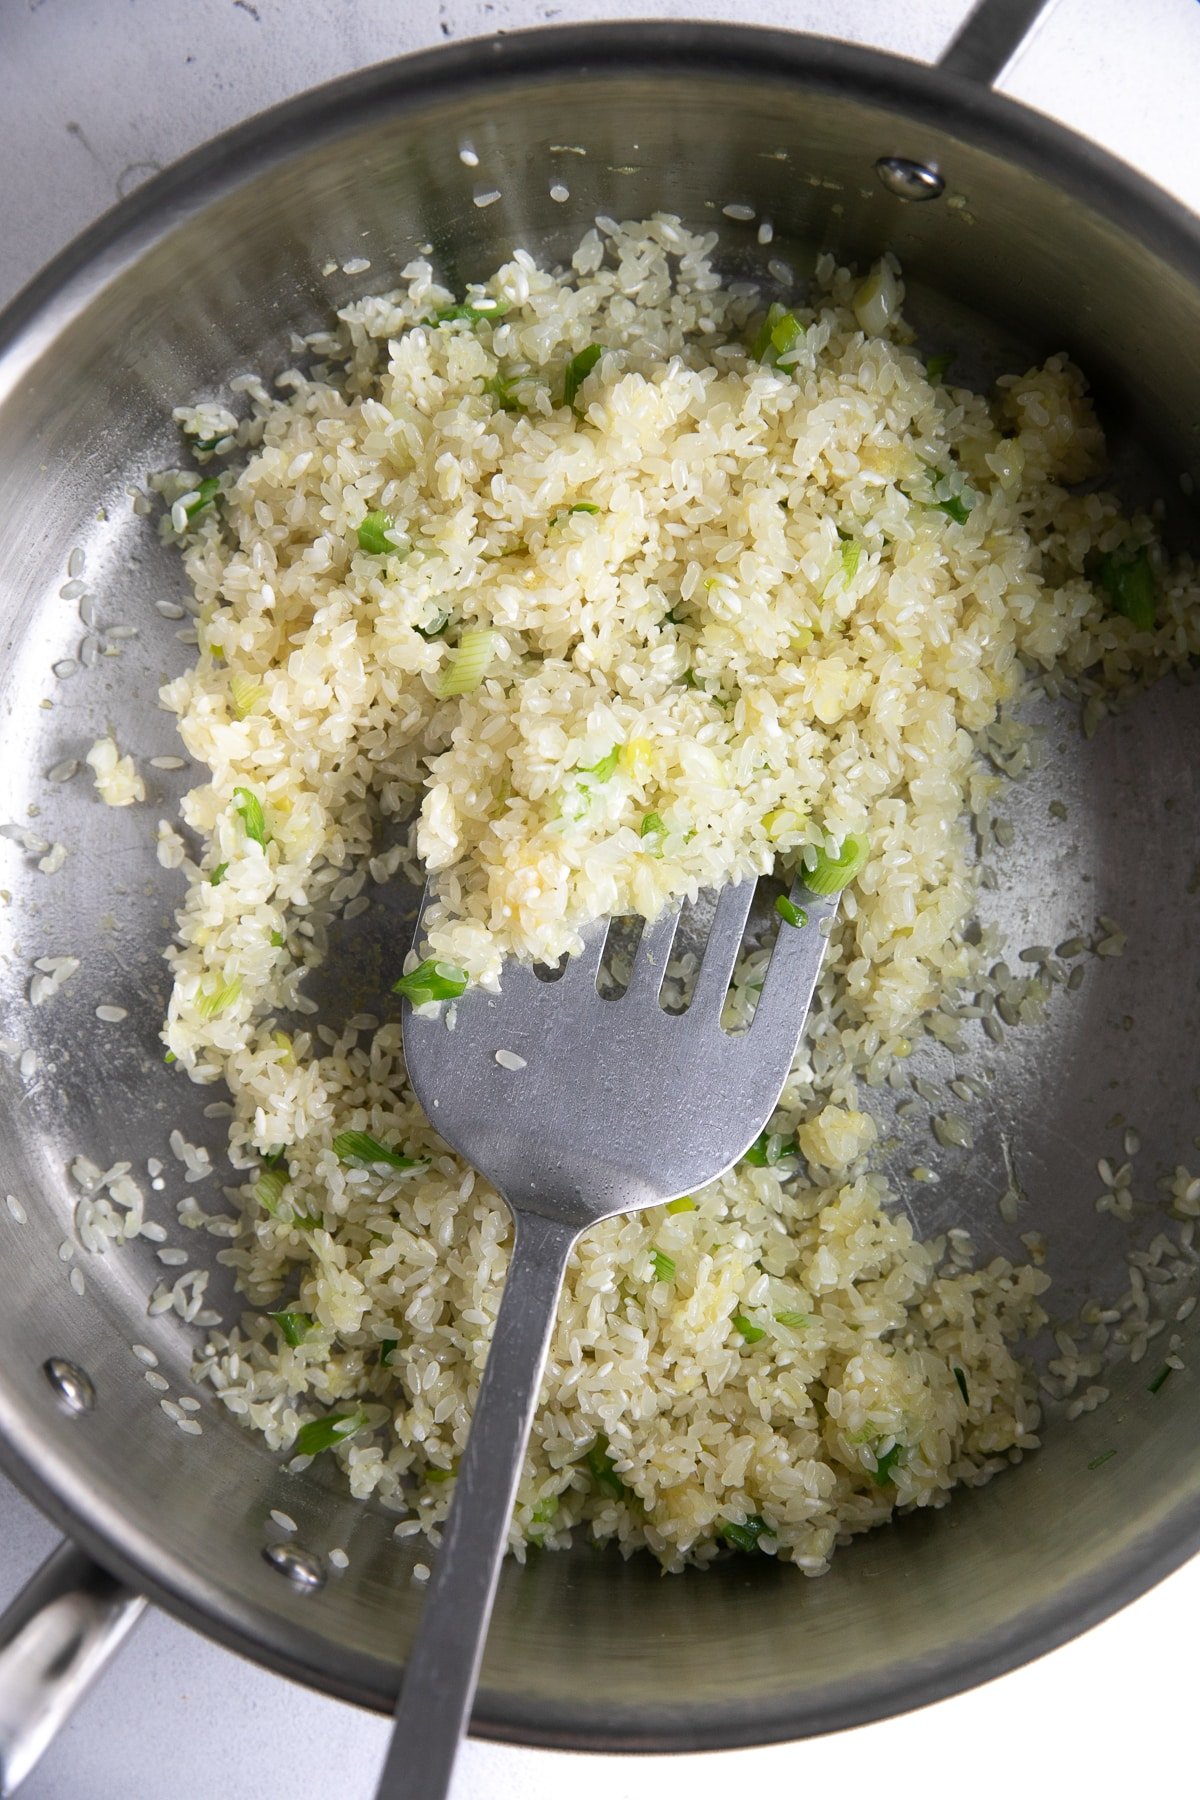 Browning rice in a hot skillet with ginger, garlic, and green onions.